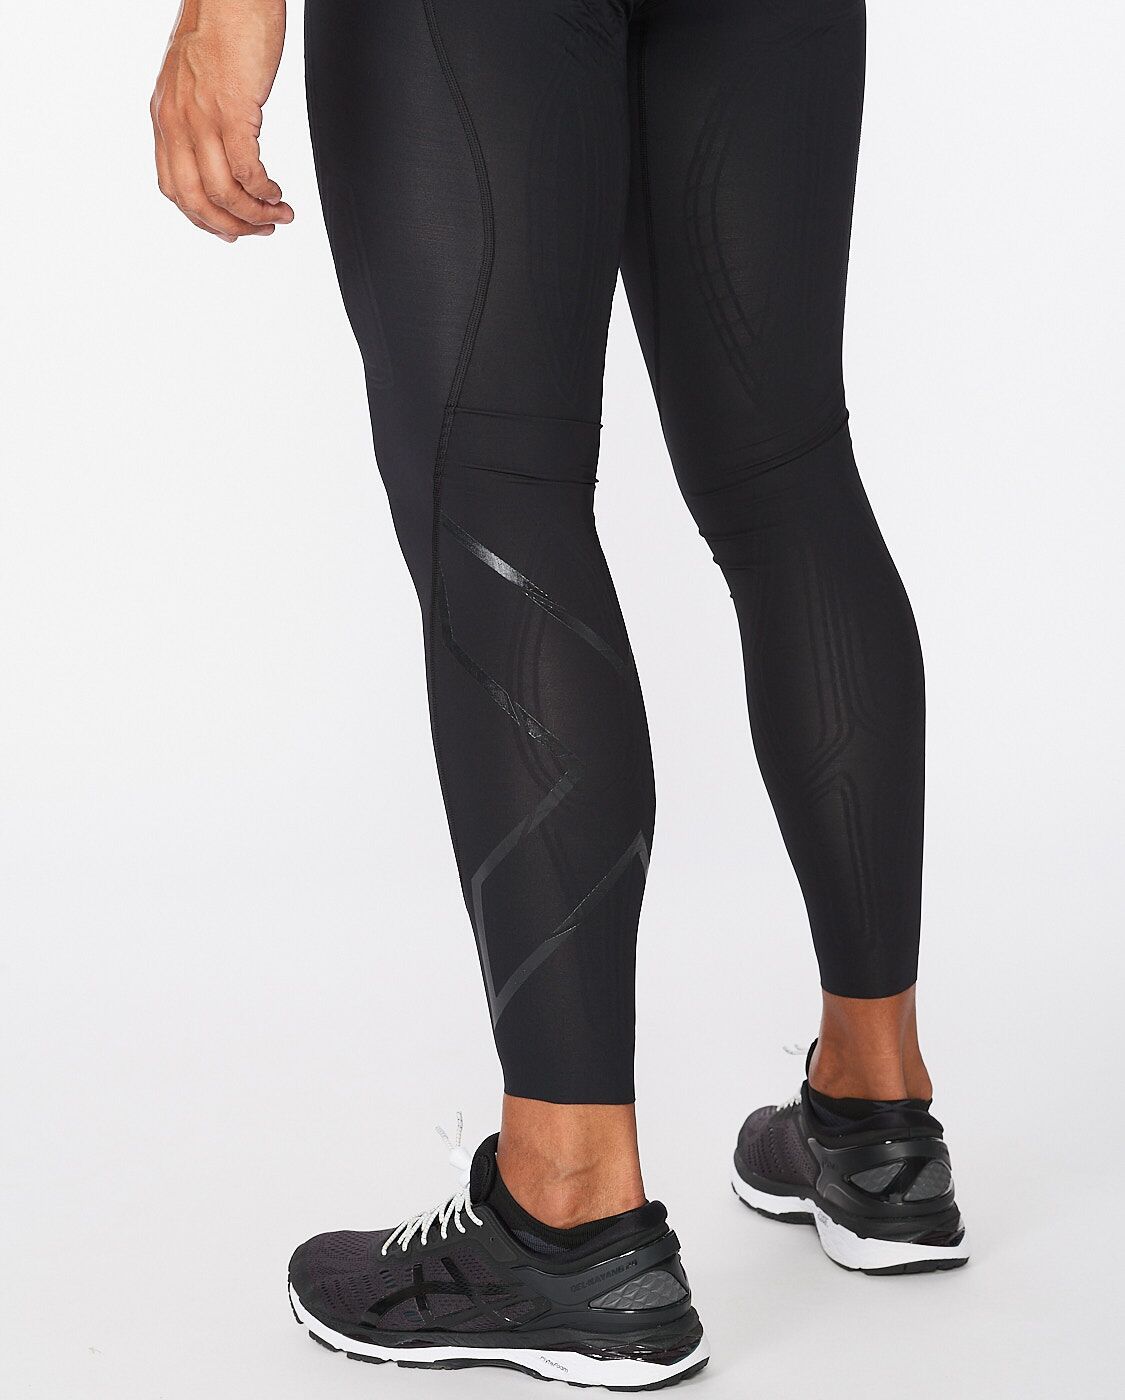 2XU South Africa - Men's Force Compression Tights - Black/Nero